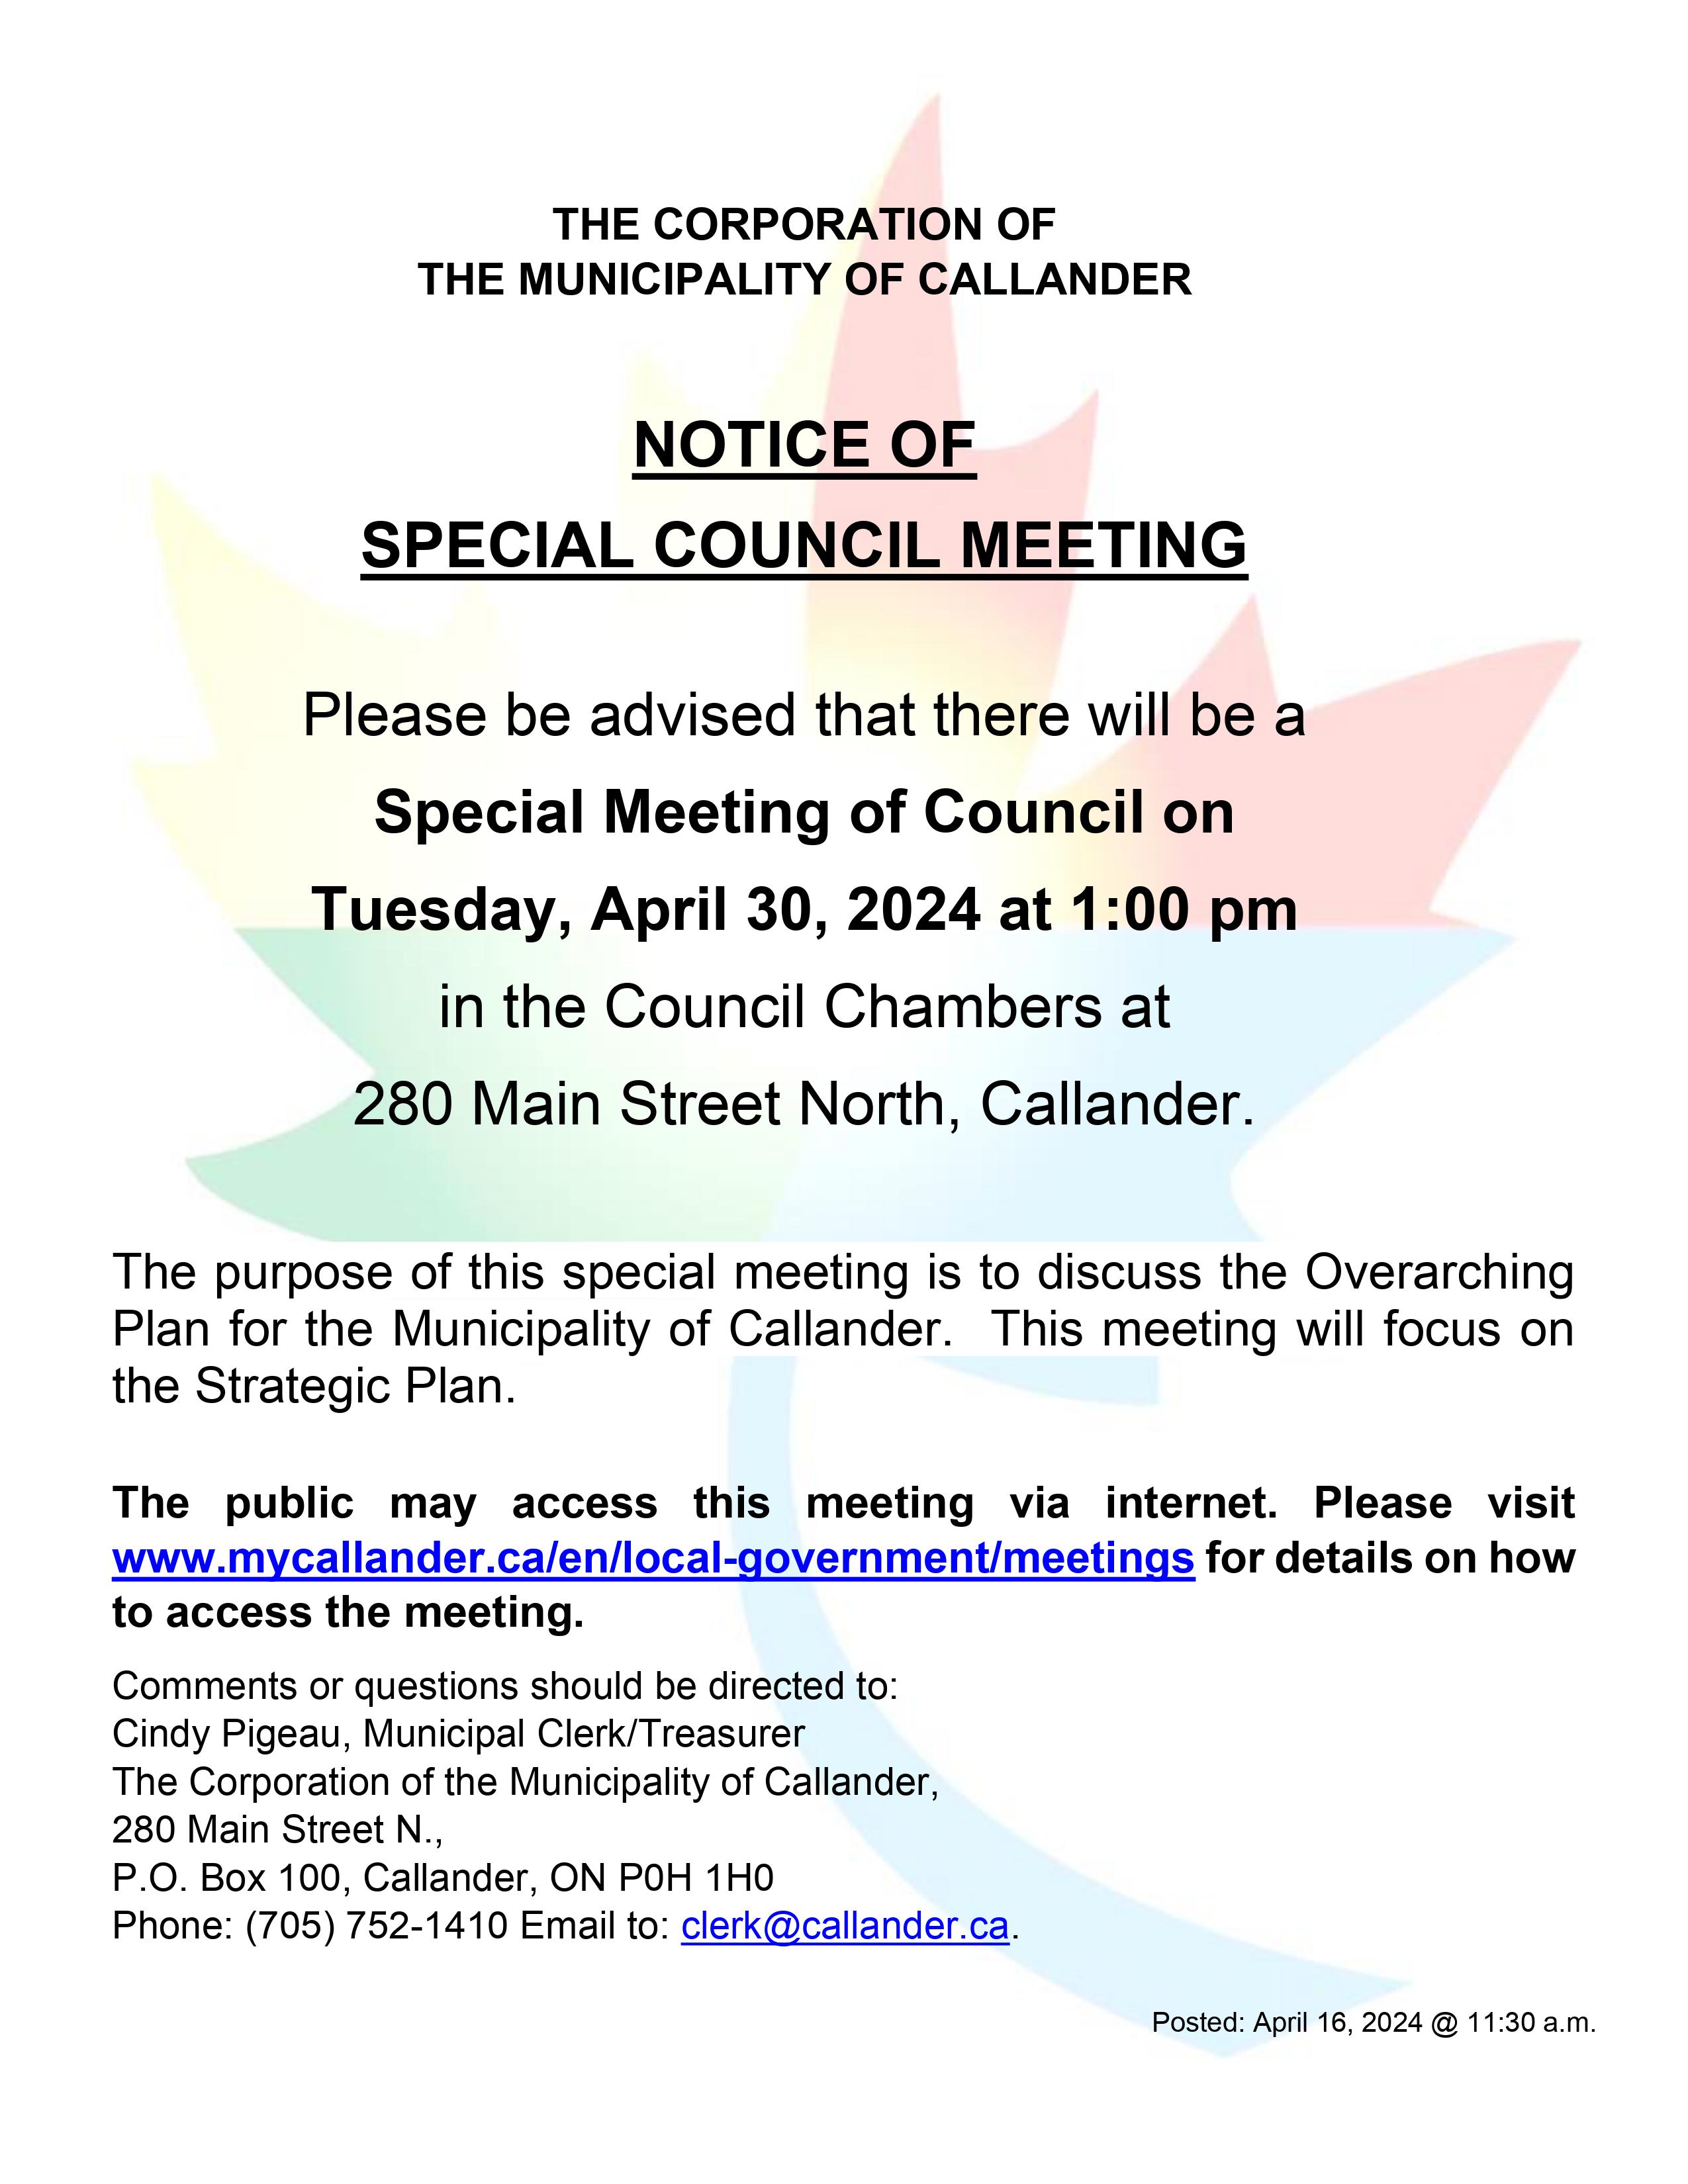 NOTICE OF SPECIAL COUNCIL MEETING